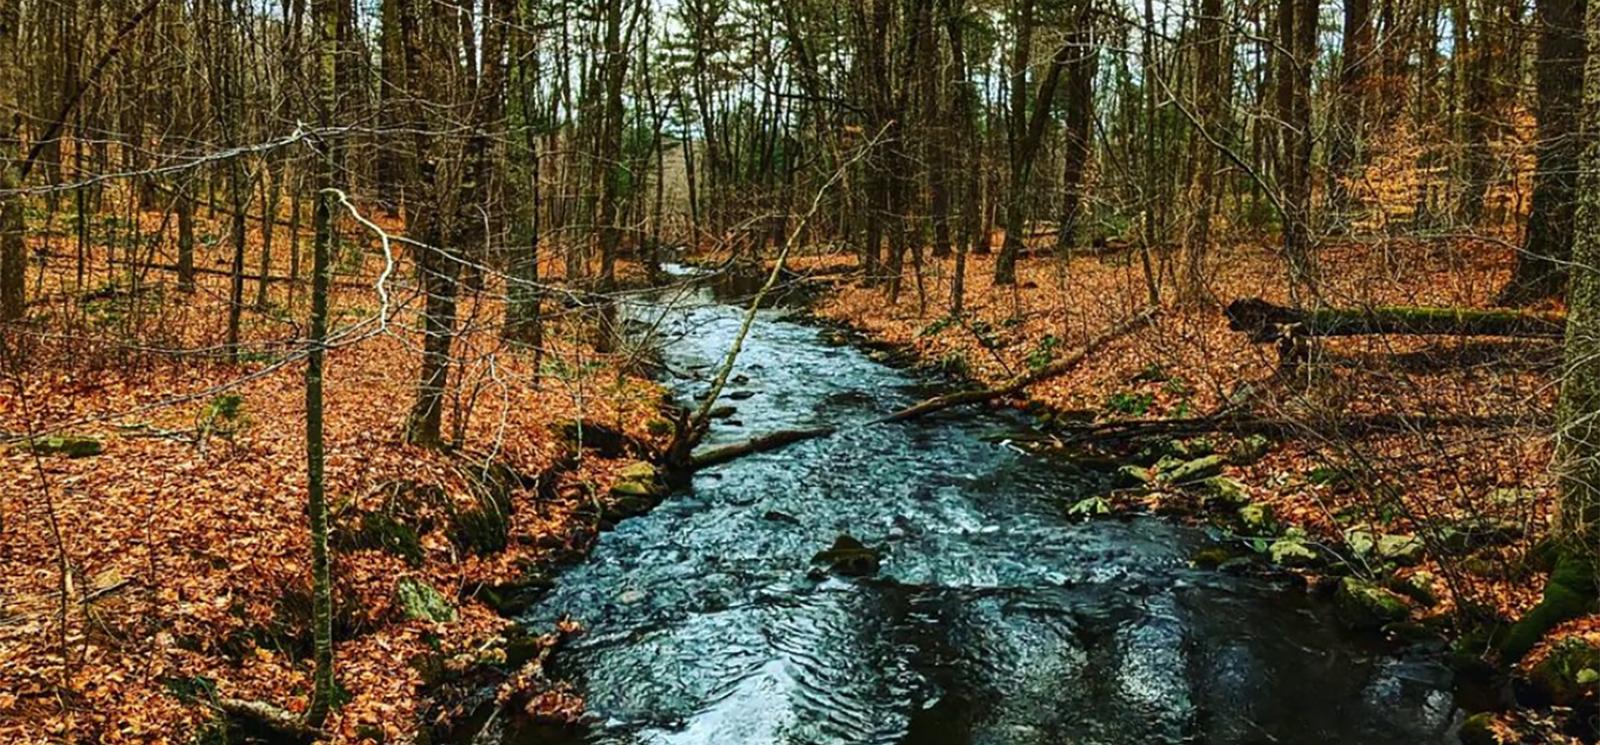 A river in the woods in the fall (Instagram@mikelphotoz)